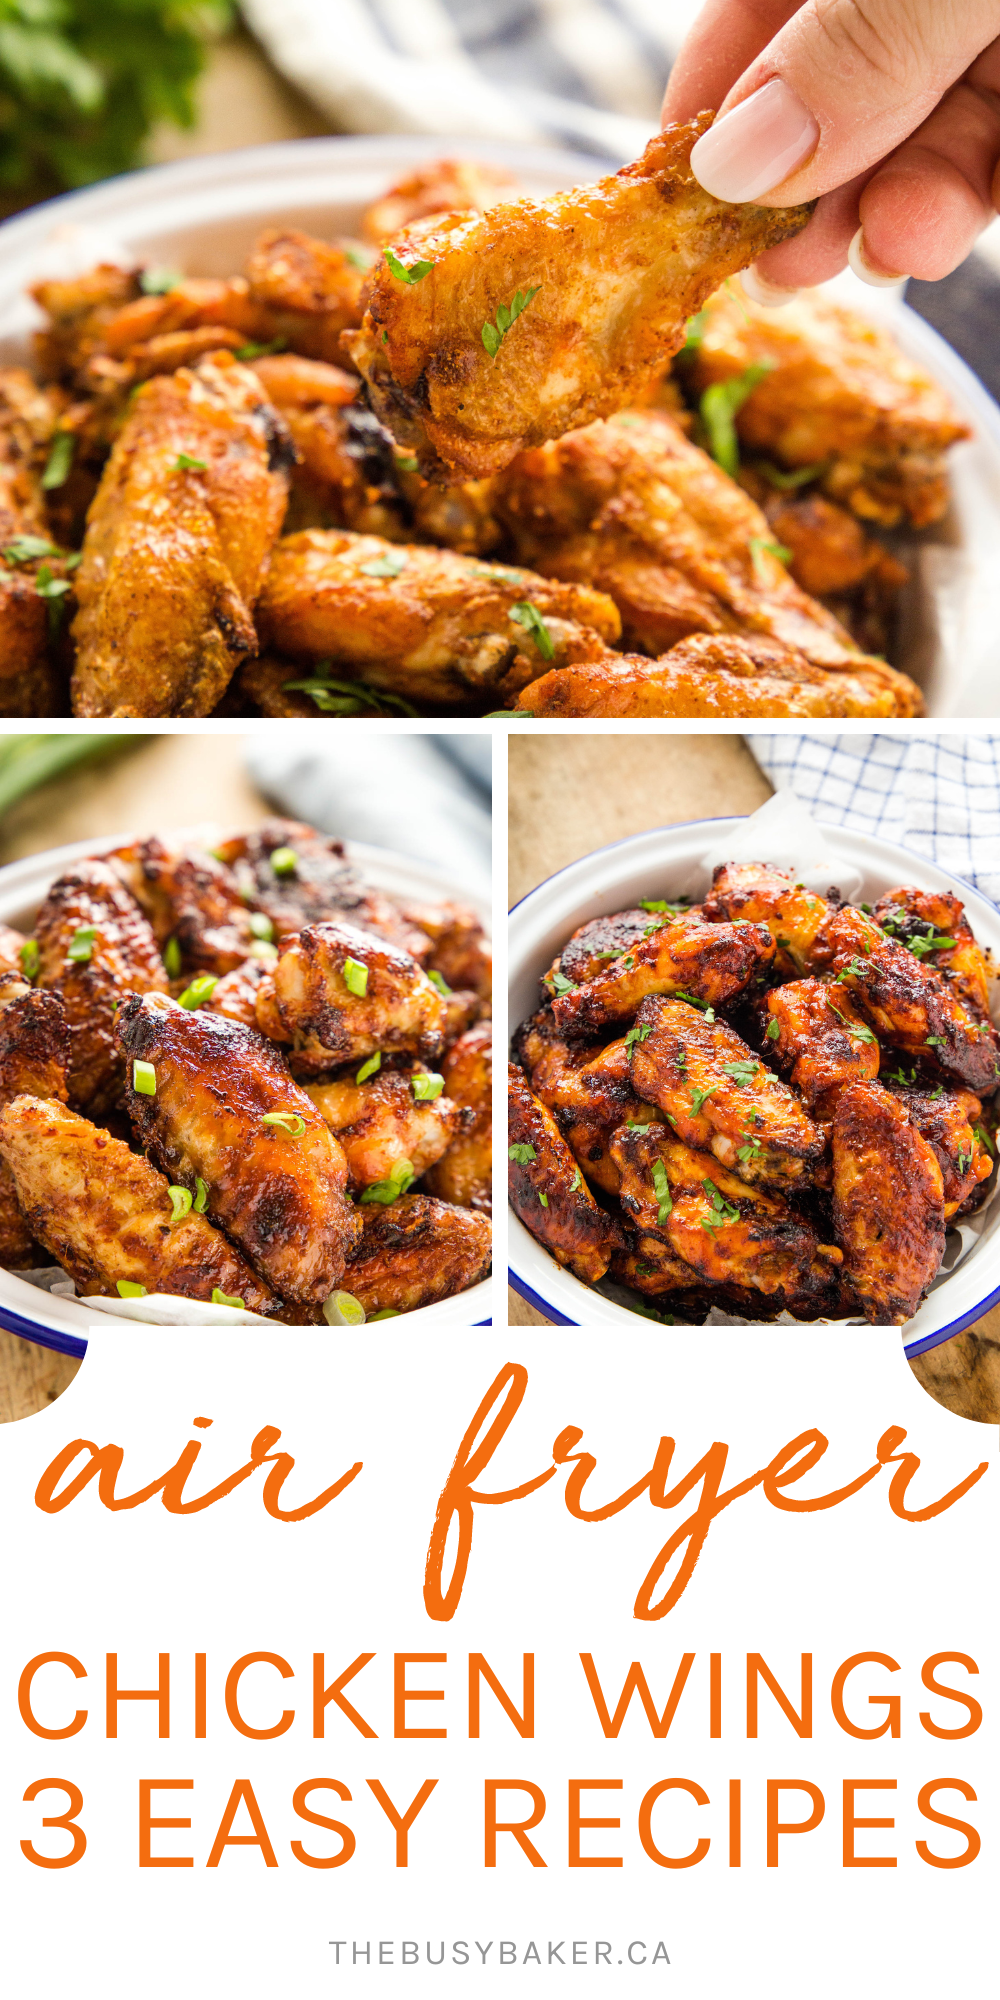 This Air Fryer Chicken Wings recipe is perfect for game day! Easy to make in minutes with basic pantry ingredients - hot wings, honey garlic, or extra crispy. Recipe from thebusybaker.ca! #airfryerchickenwings #chickenwings #honeygarlicwings #hotwings #crispychickenwings #secretingredient #airfryerchicken #airfryerwings via @busybakerblog